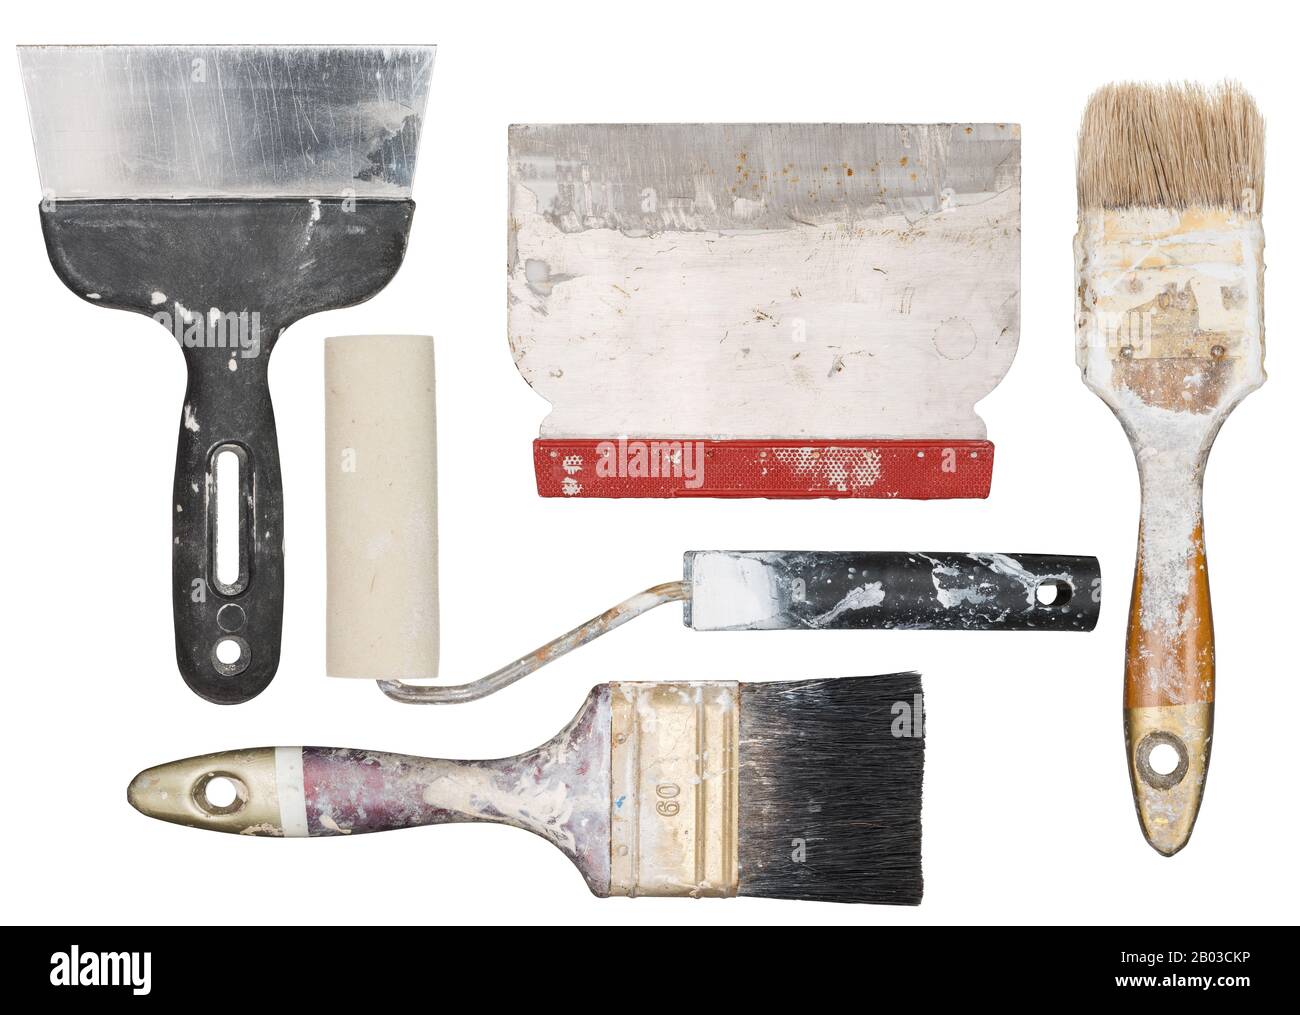 Isolated used painting tools. Paint brushes, roller and spatula. Stock Photo